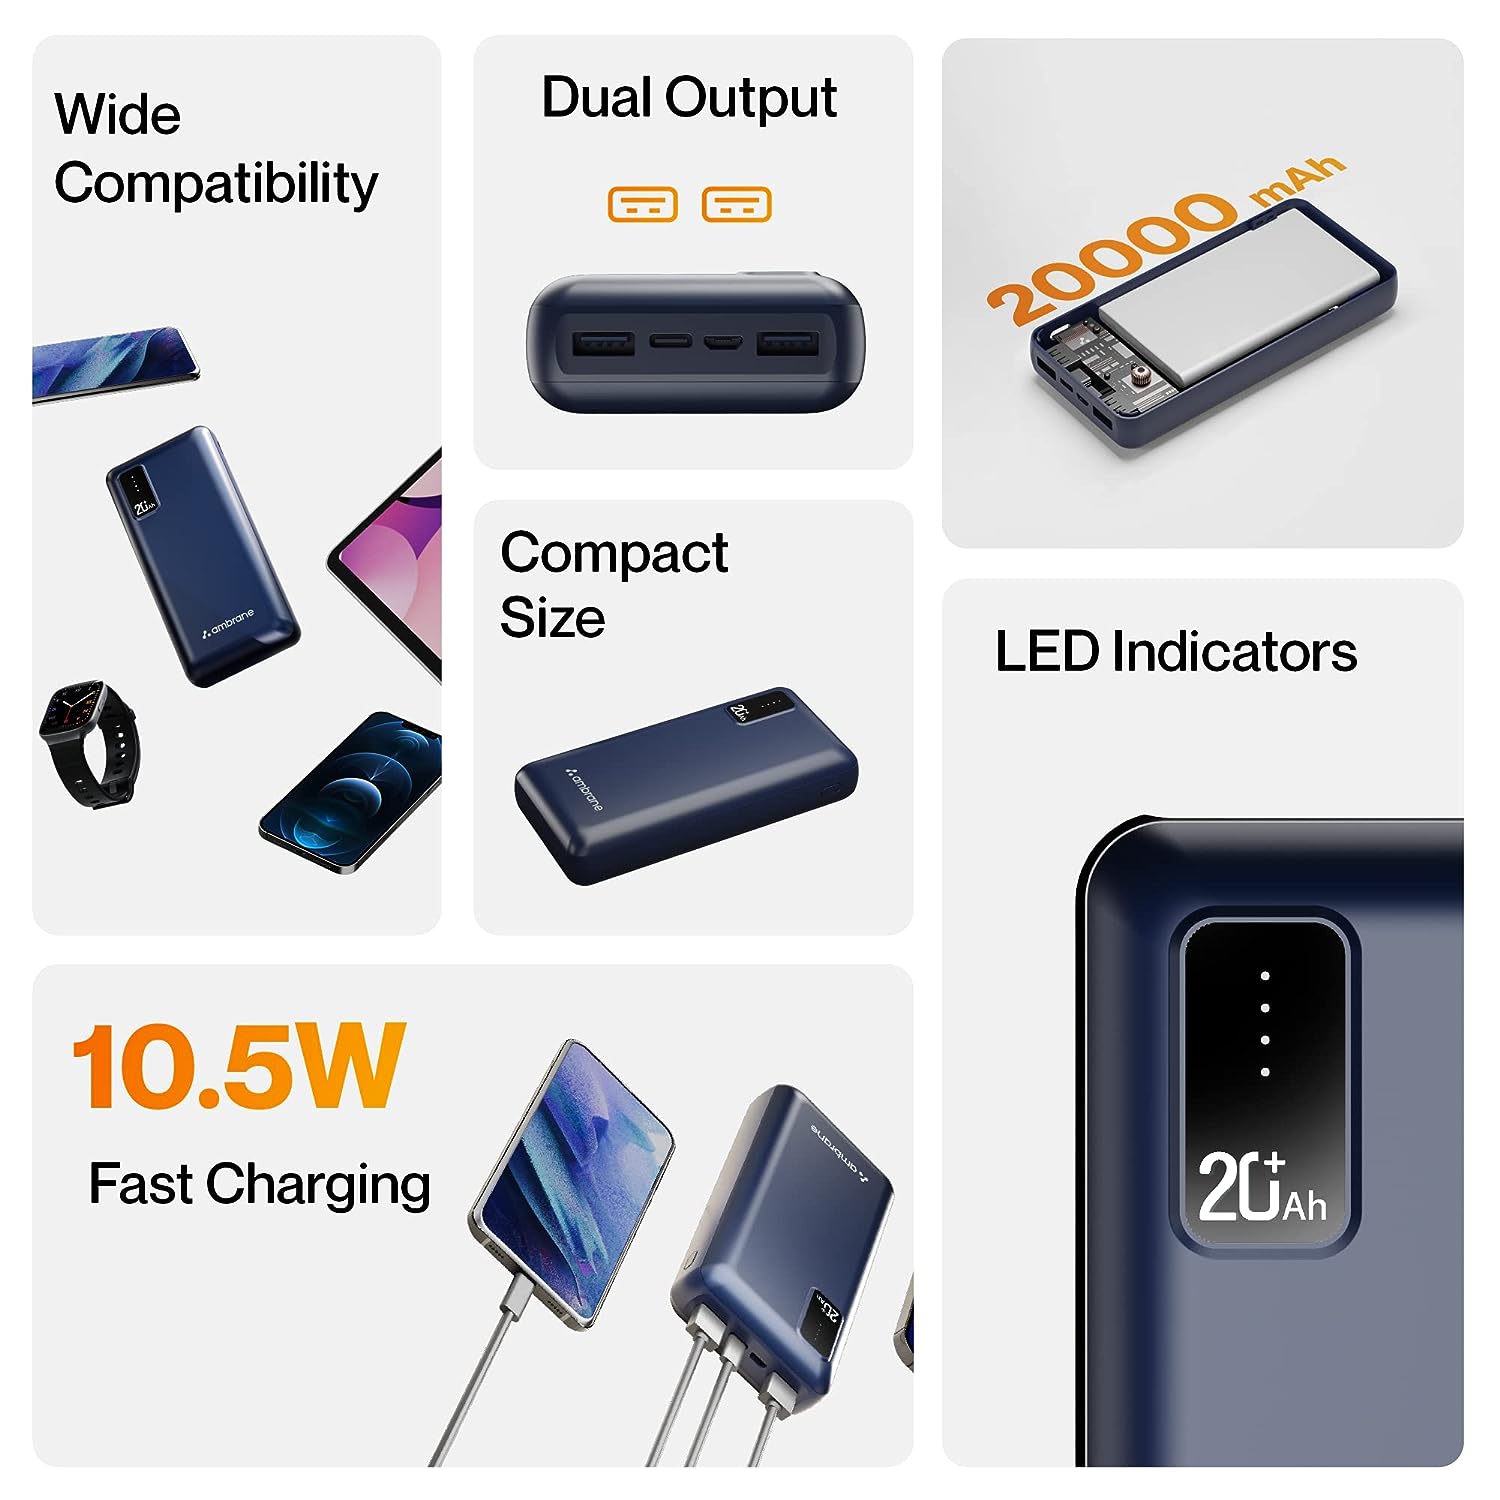 Ambrane 20000mAh Power Bank with 10.5W Fast Charging, Dual USB Output, Made in India, Multi-Layer Protection, Wide Compatibility, Stylish & Compact Design + Free Type-C Cable (Capsule 20, Blue)-Power Bank-dealsplant